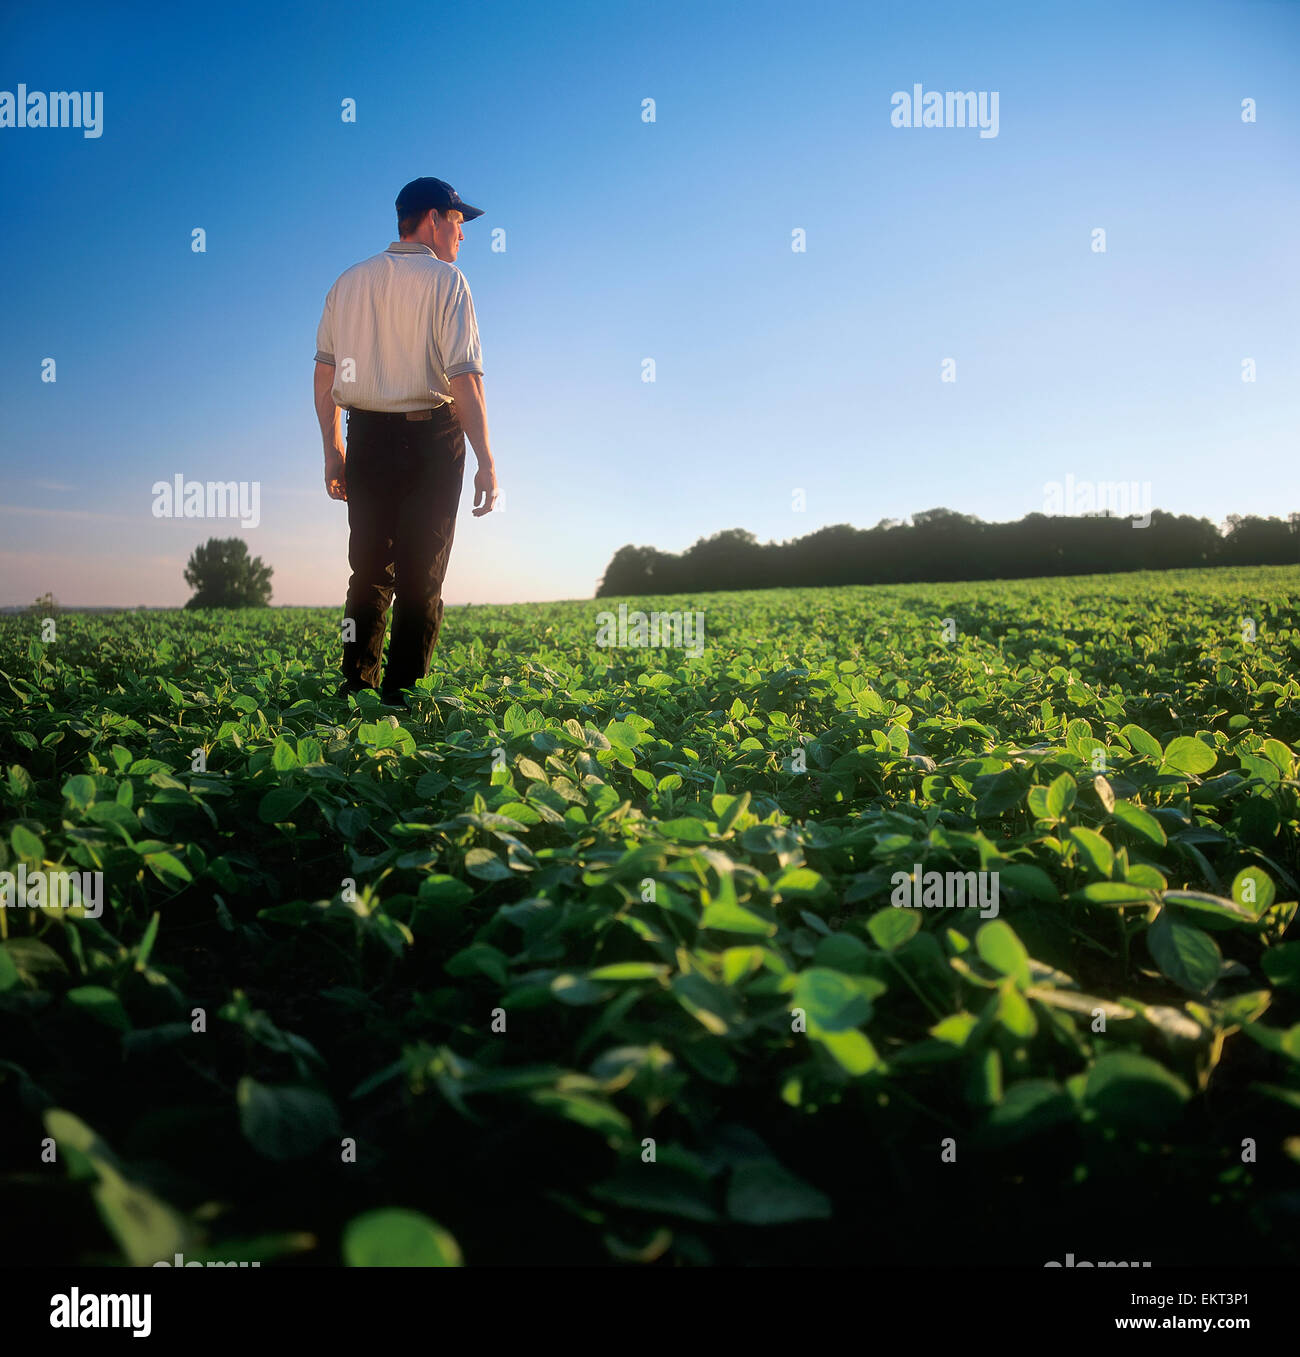 Agriculture - A farmer looks out across his early growth soybean crop, inspecting it Stock Photo